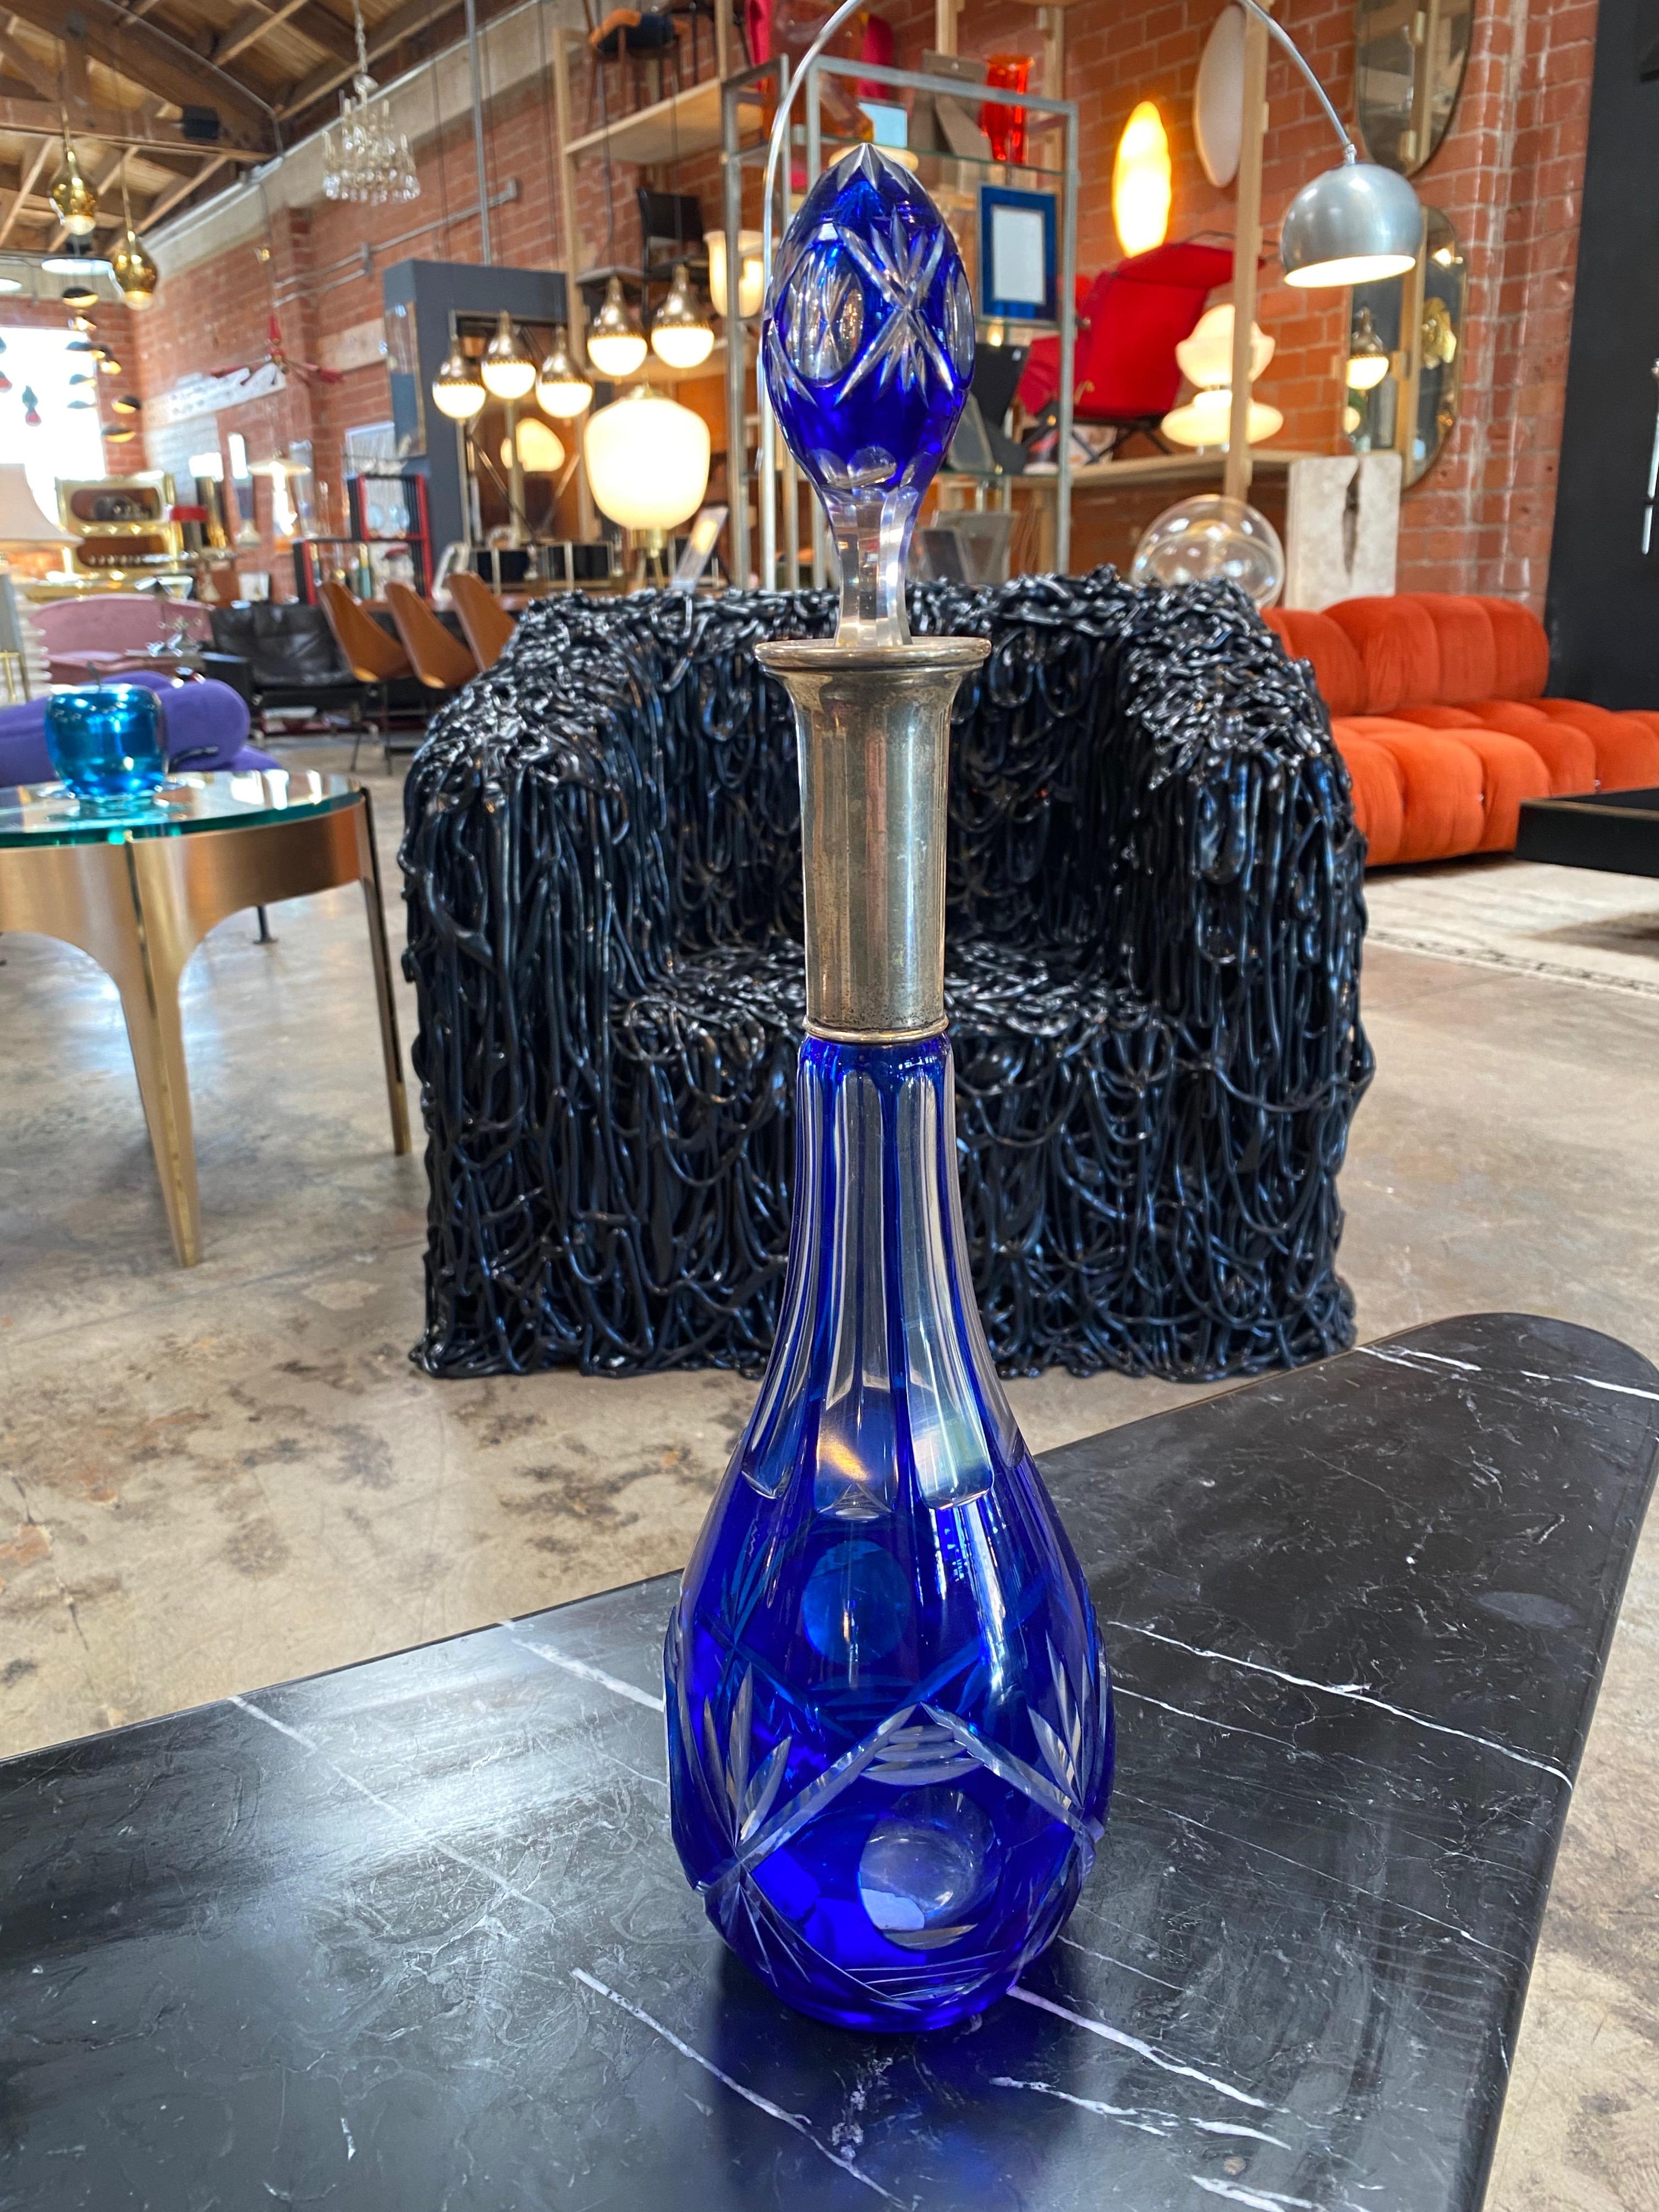 A beautiful and substantial 1930s century colorful Italian Murano art glass bottle, Italy, 1938.
The tall bottle has a beautiful abstract design.